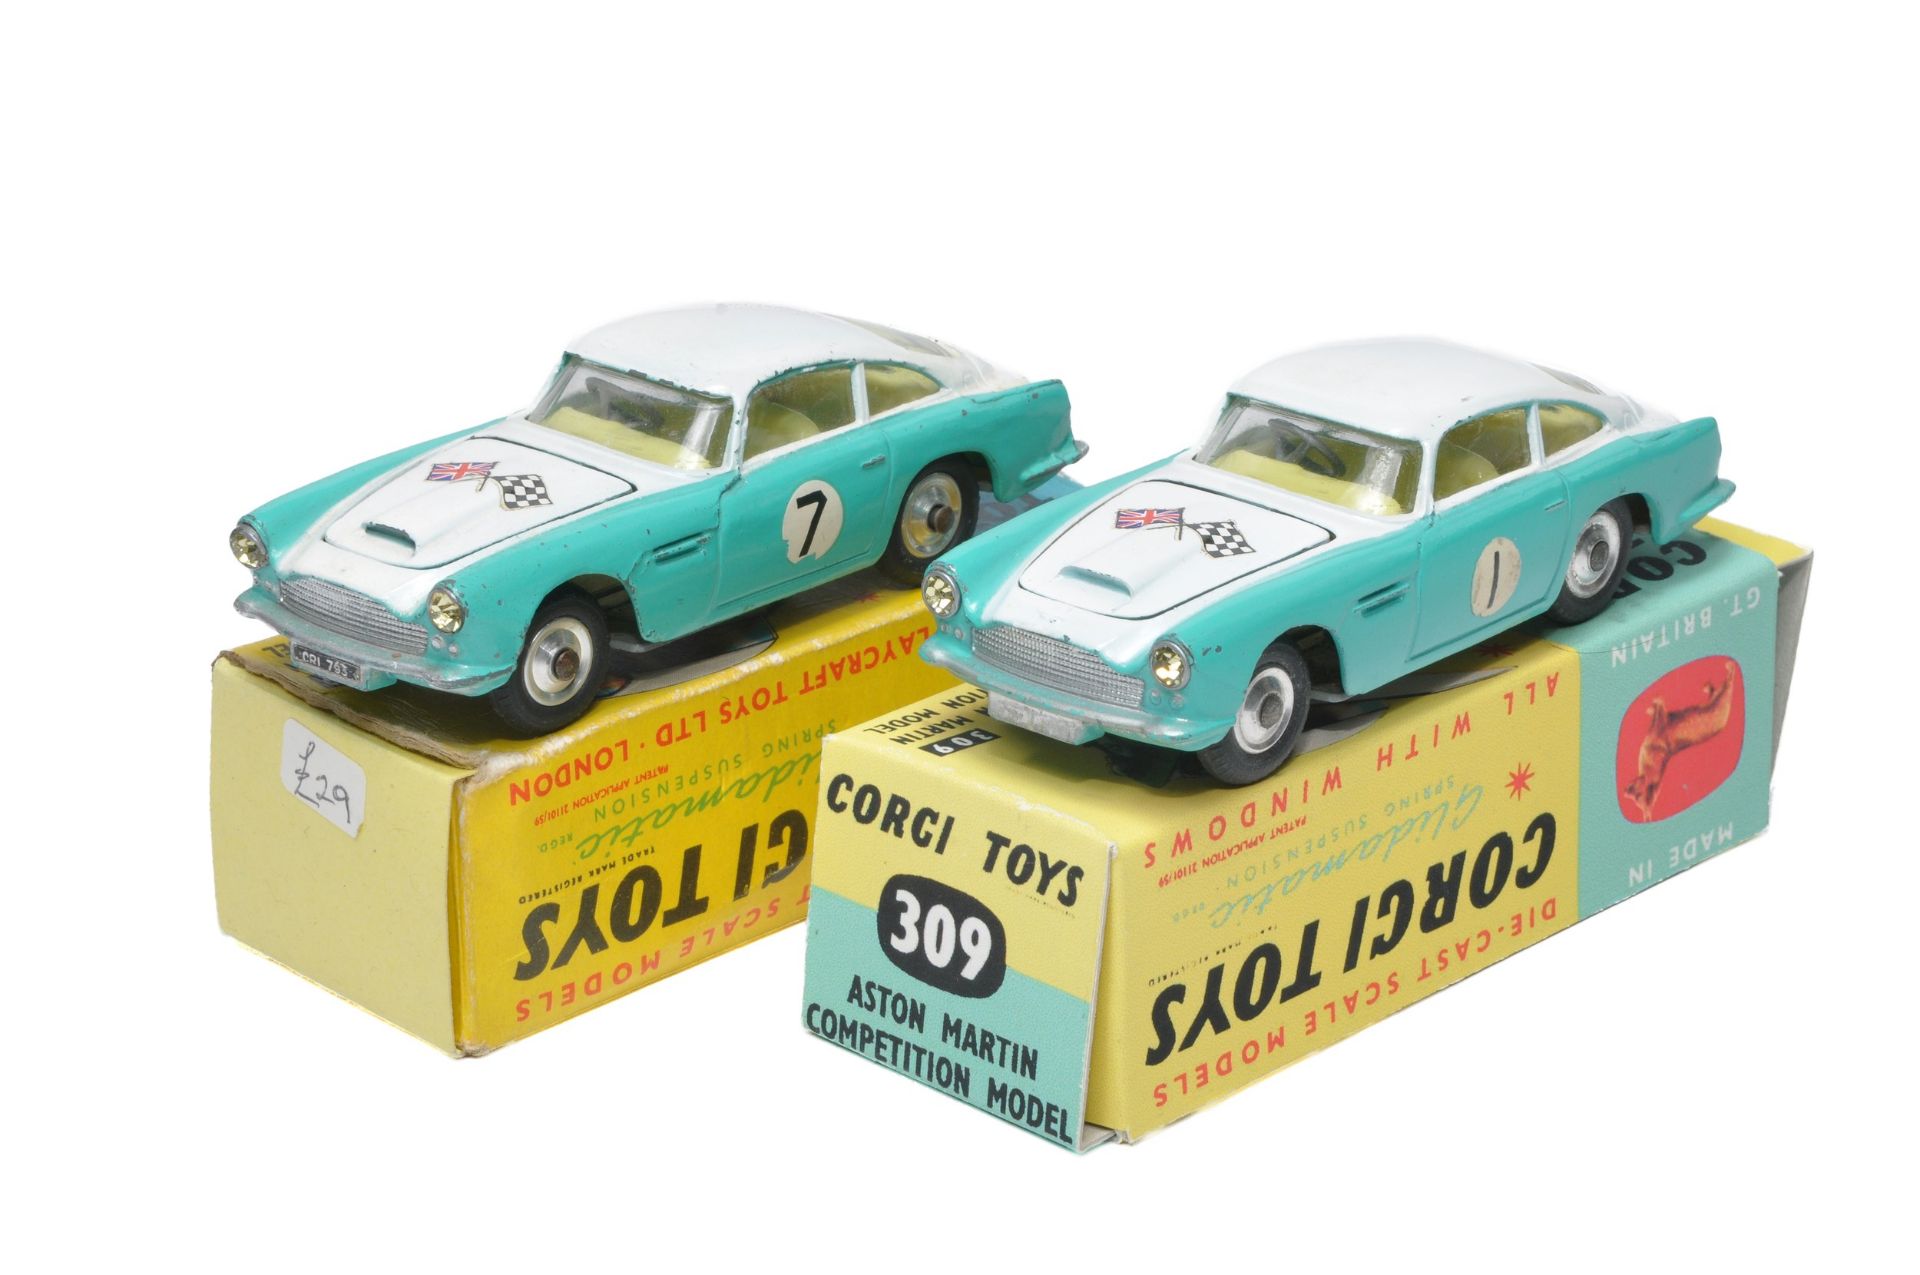 Corgi No. 309 duo of Aston Martin Competition Model issues (RN variations as shown). Both